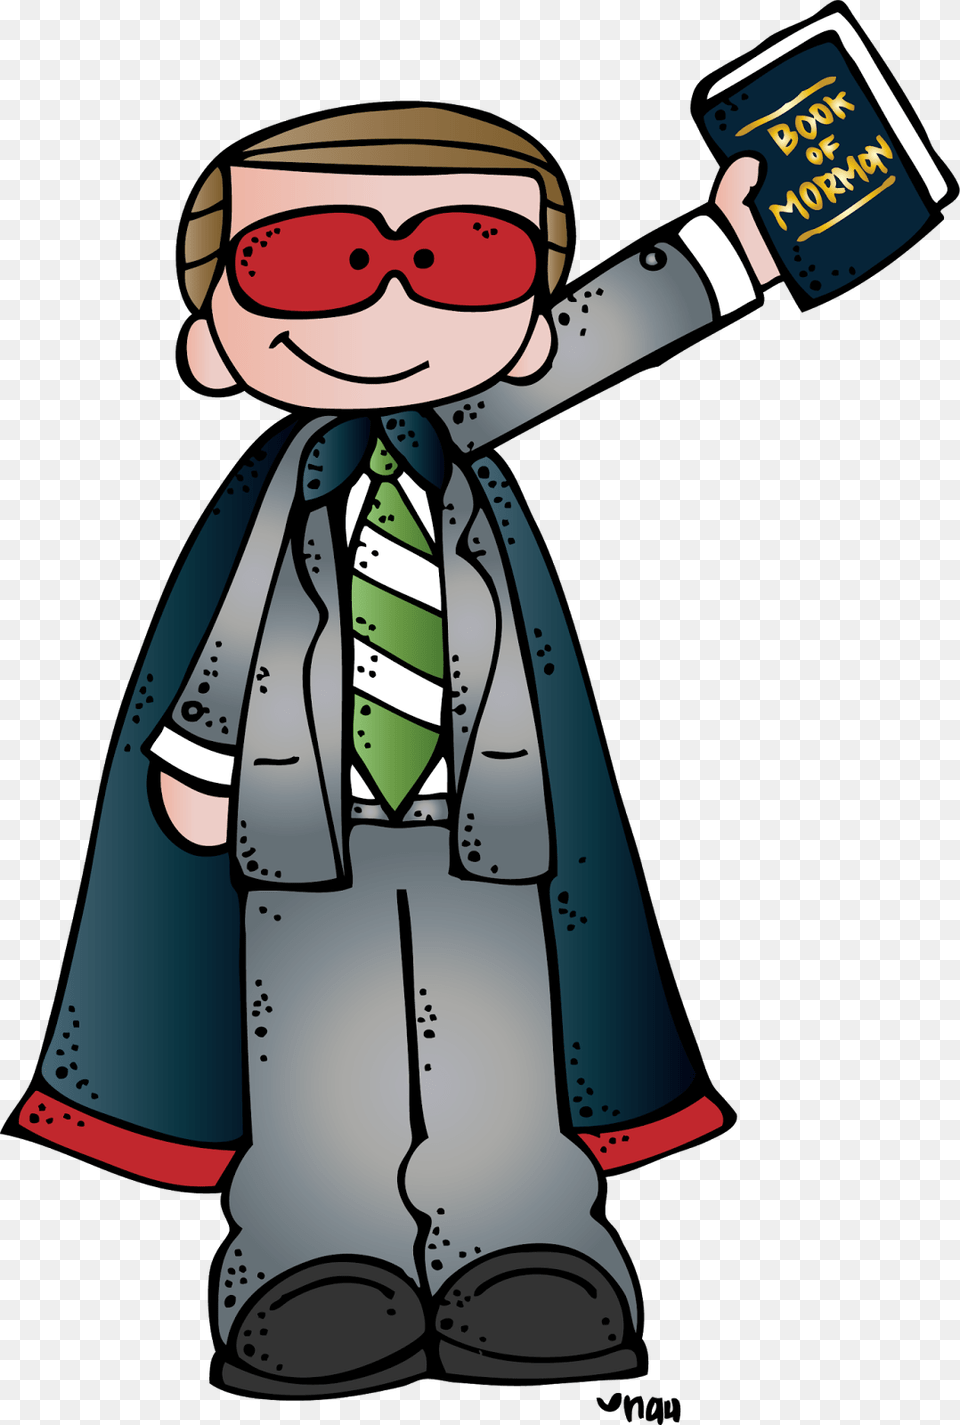 Cool Clip Art Melonheadz Lds Illustrating Primary, Accessories, Formal Wear, Tie, Comics Png